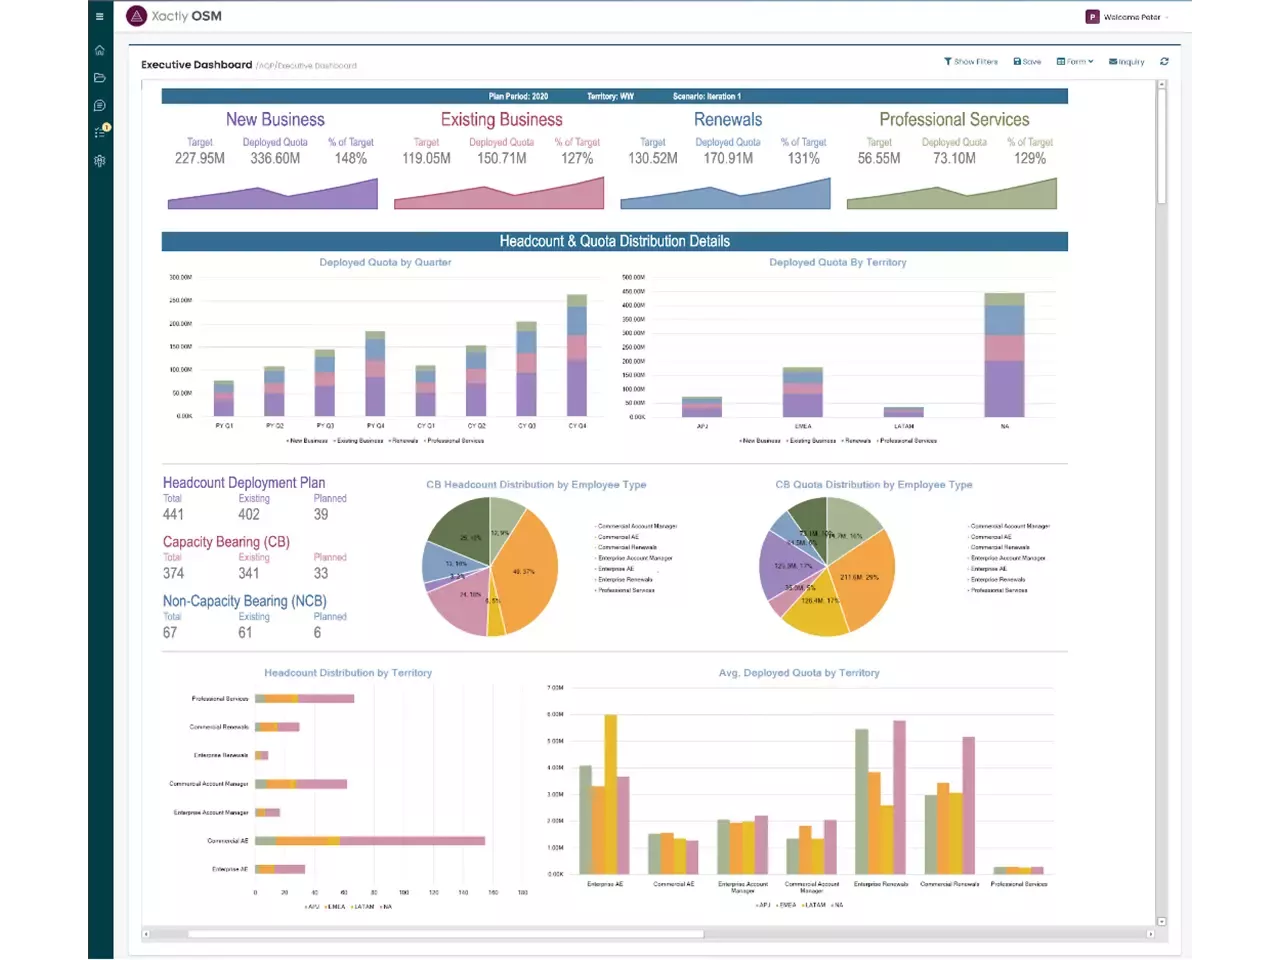 Executive dashboard view in Operational Sales Management from Xactly